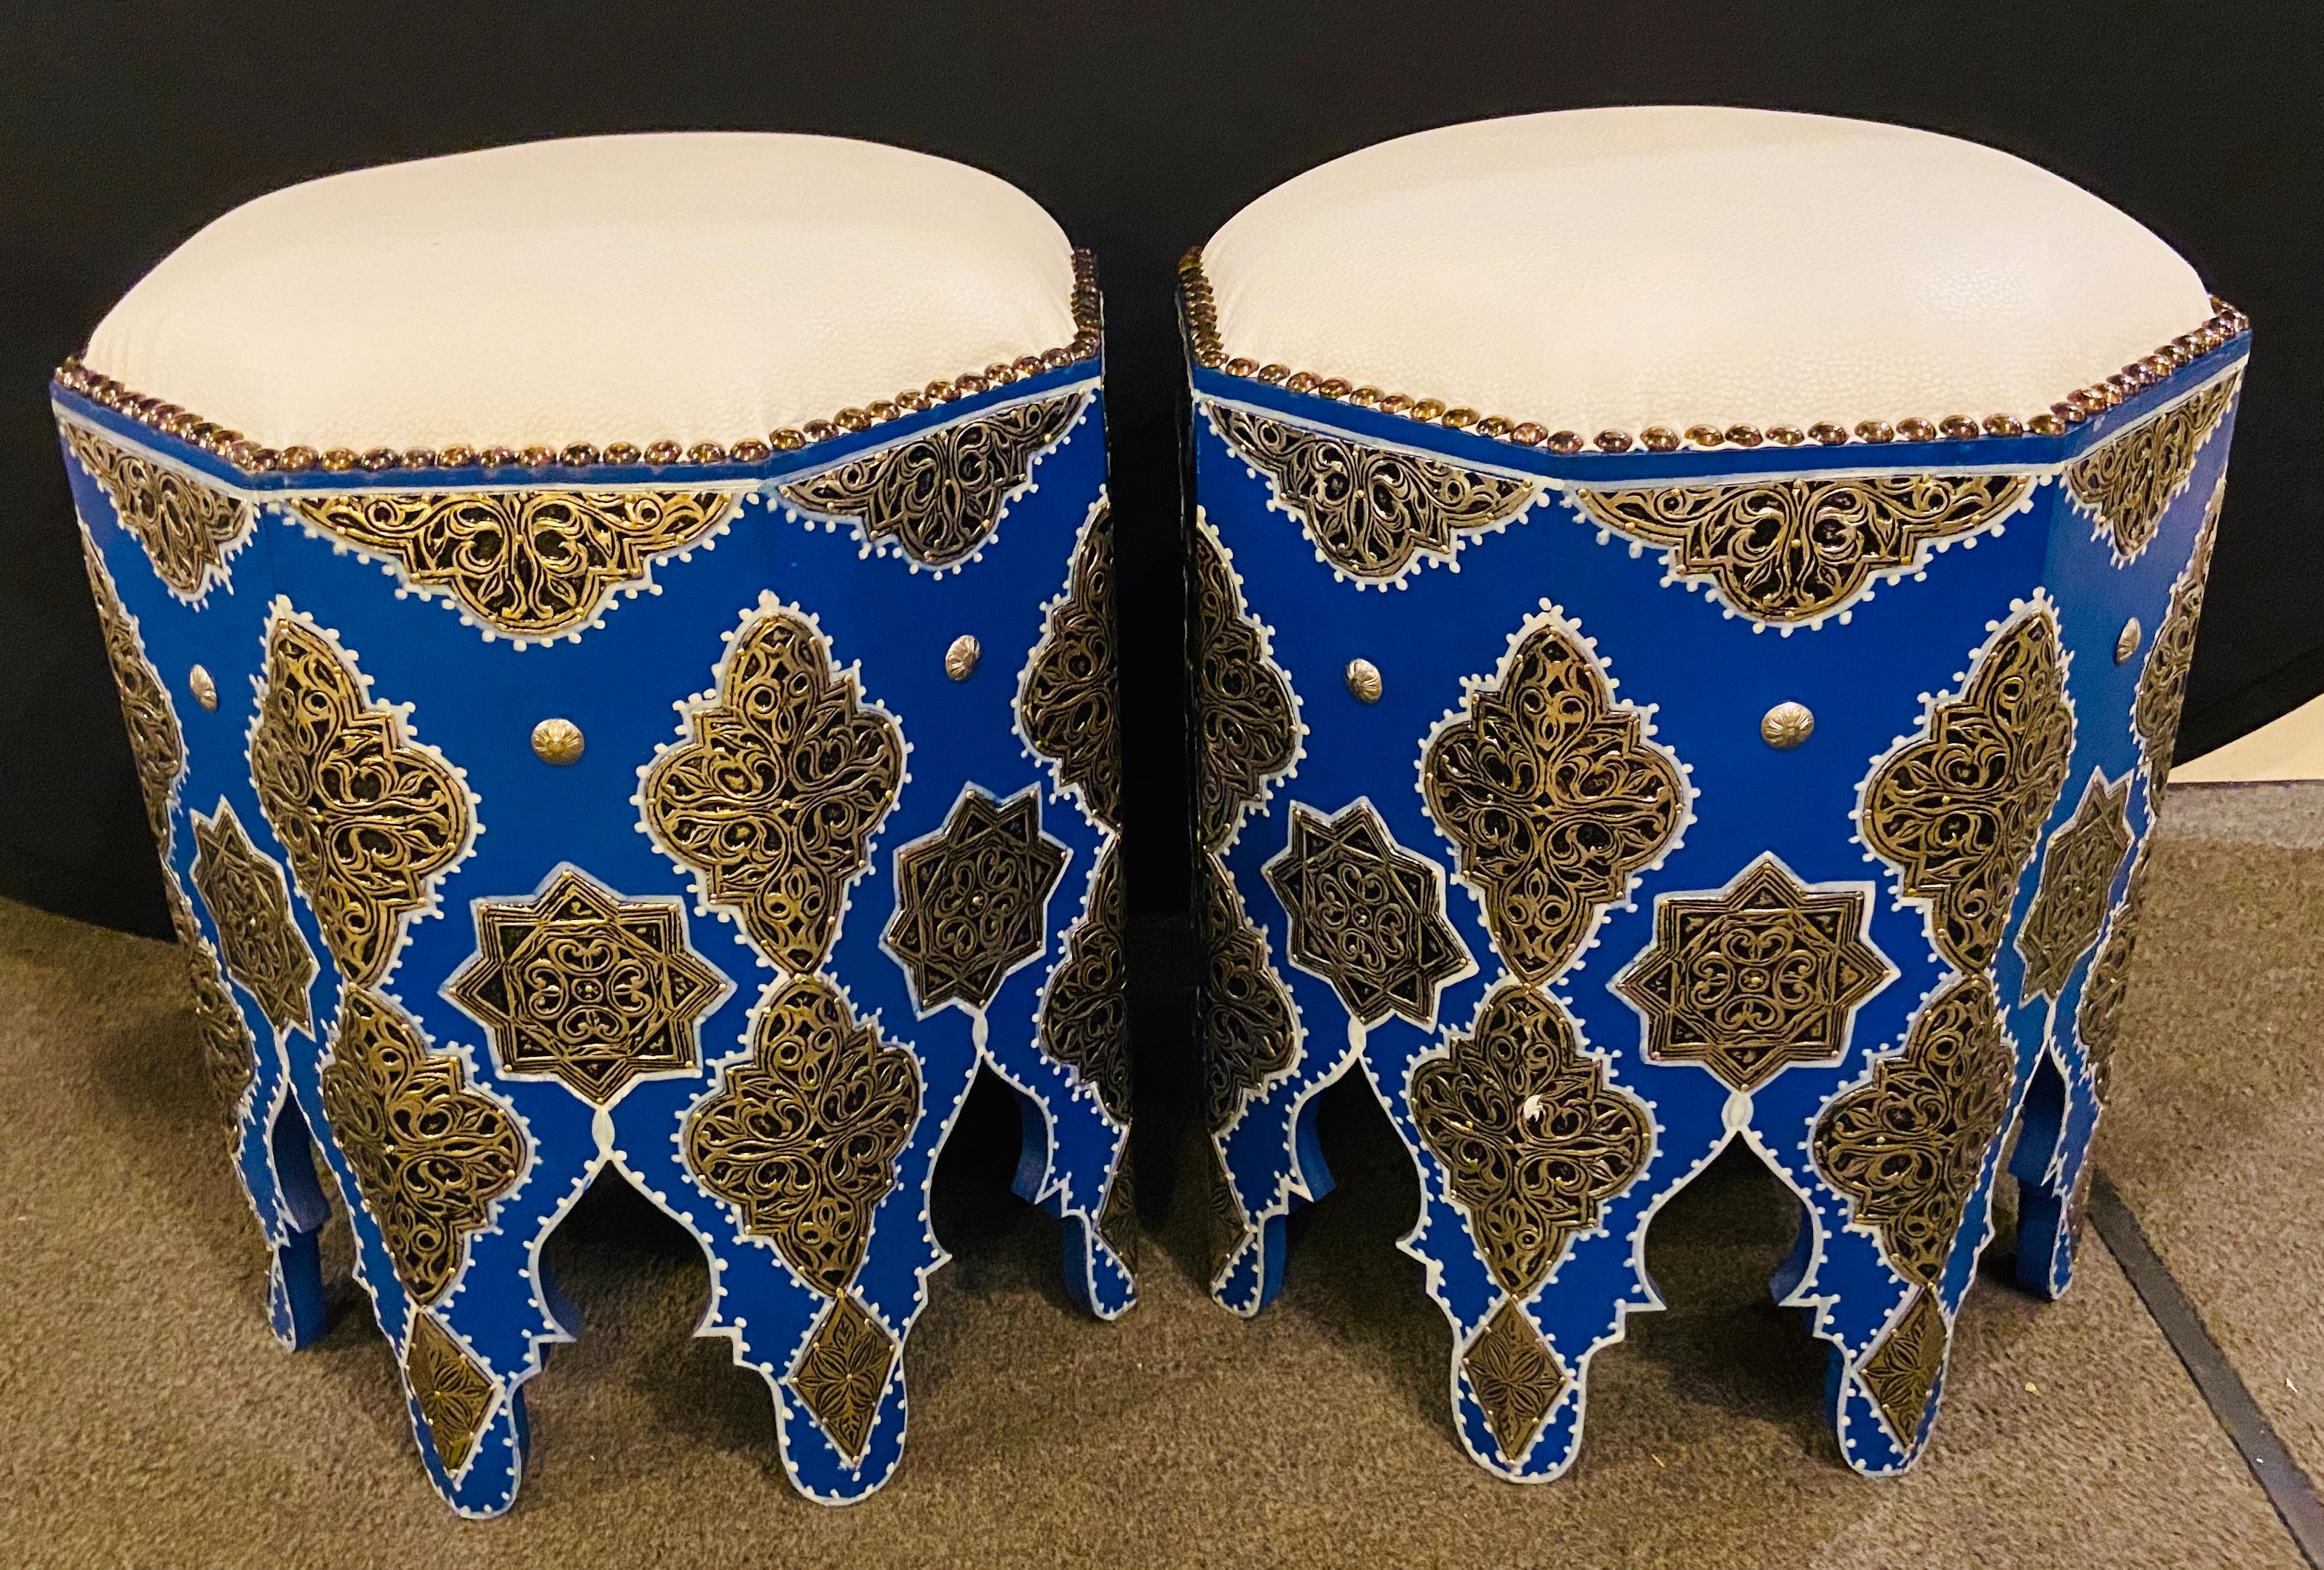 A Boho Chic Moroccan blue stool or ottoman with white leather top. The stools are hand painted in blue Majorelle ( after the Majorelle garden in Marrakech ) with white design and feature expert silver brass filigree work and thickly padded white